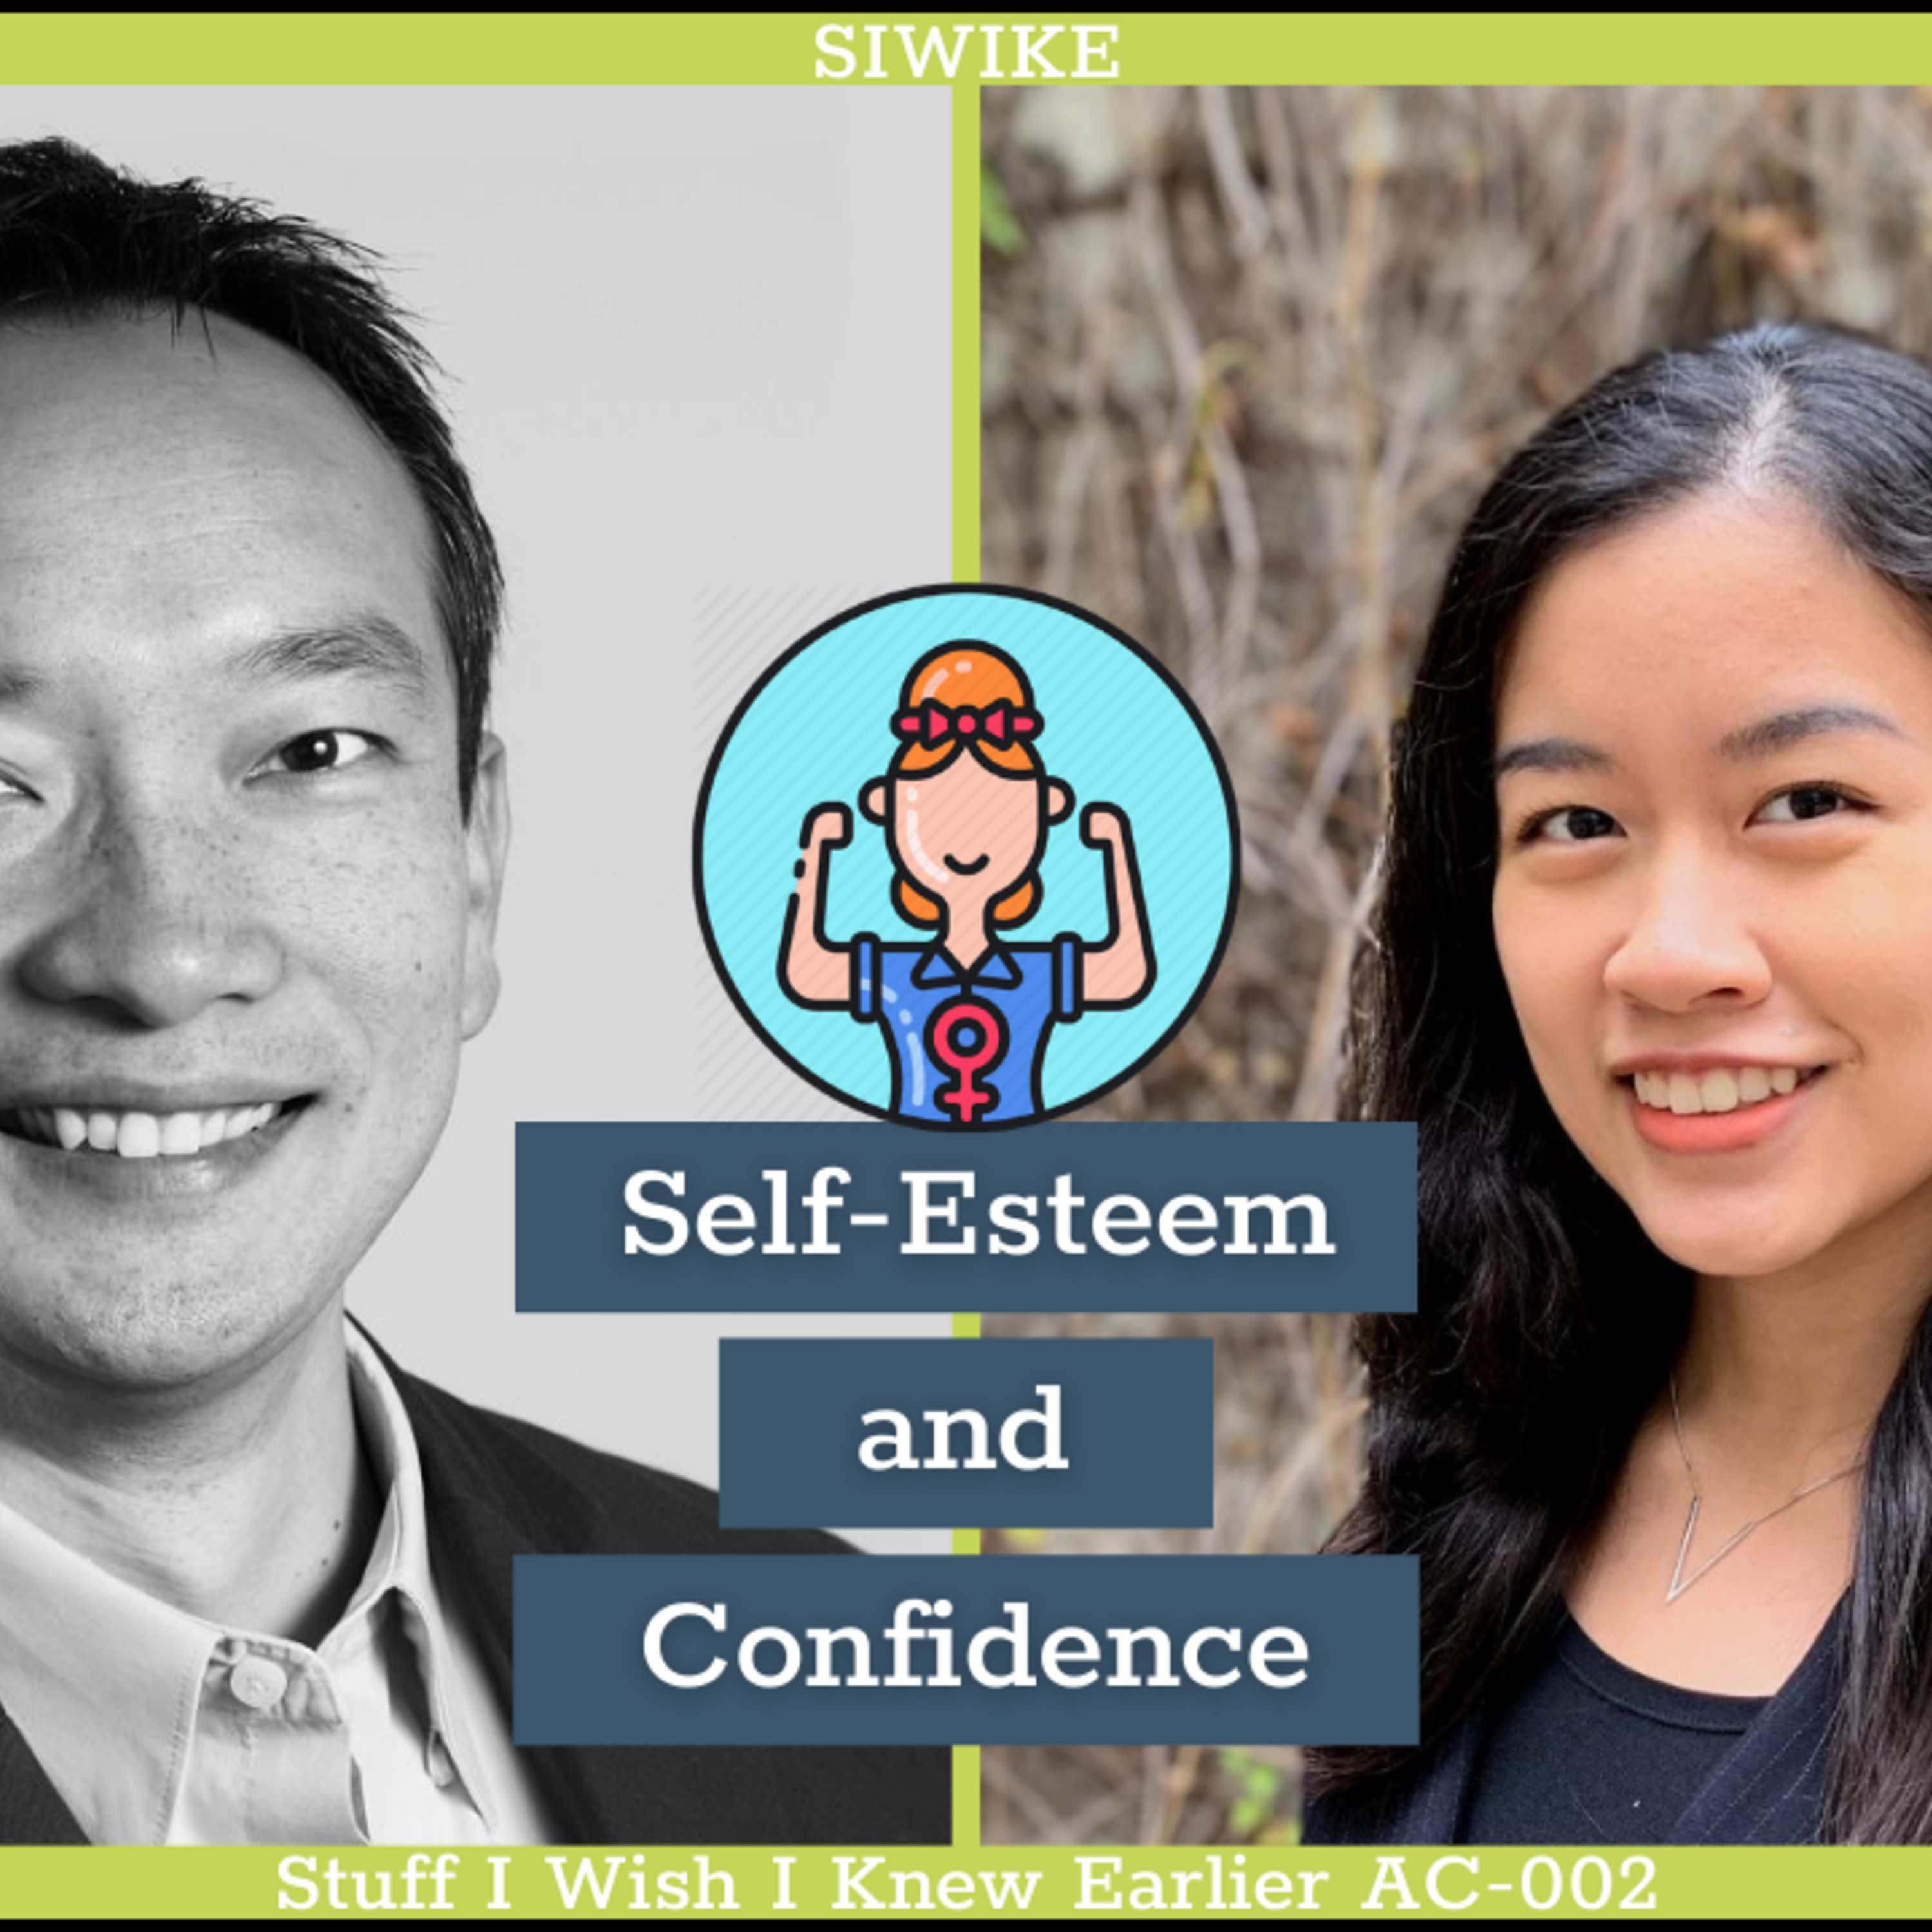 Self-esteem and Confidence: Angela Chung - SIWIKE Podcast AC-002 Mentor Corner